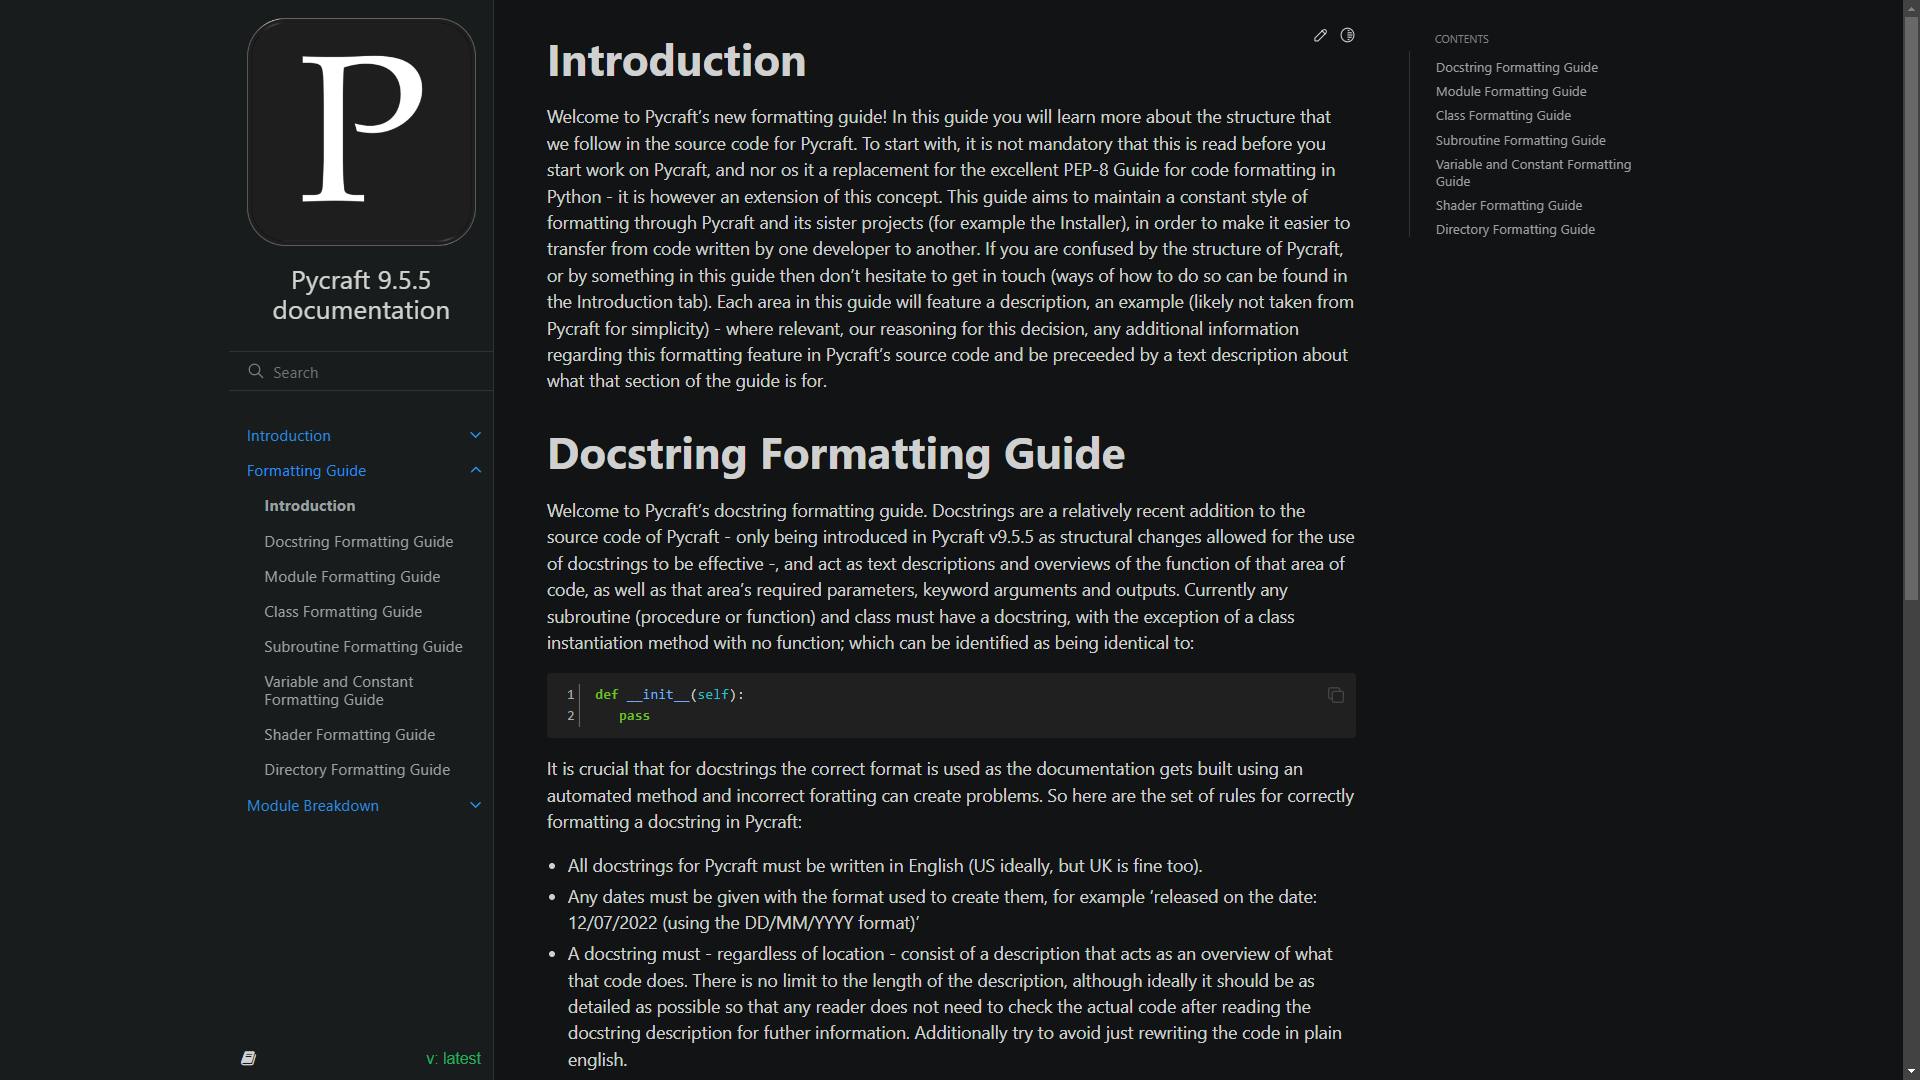 The new formatting guide for Pycraft